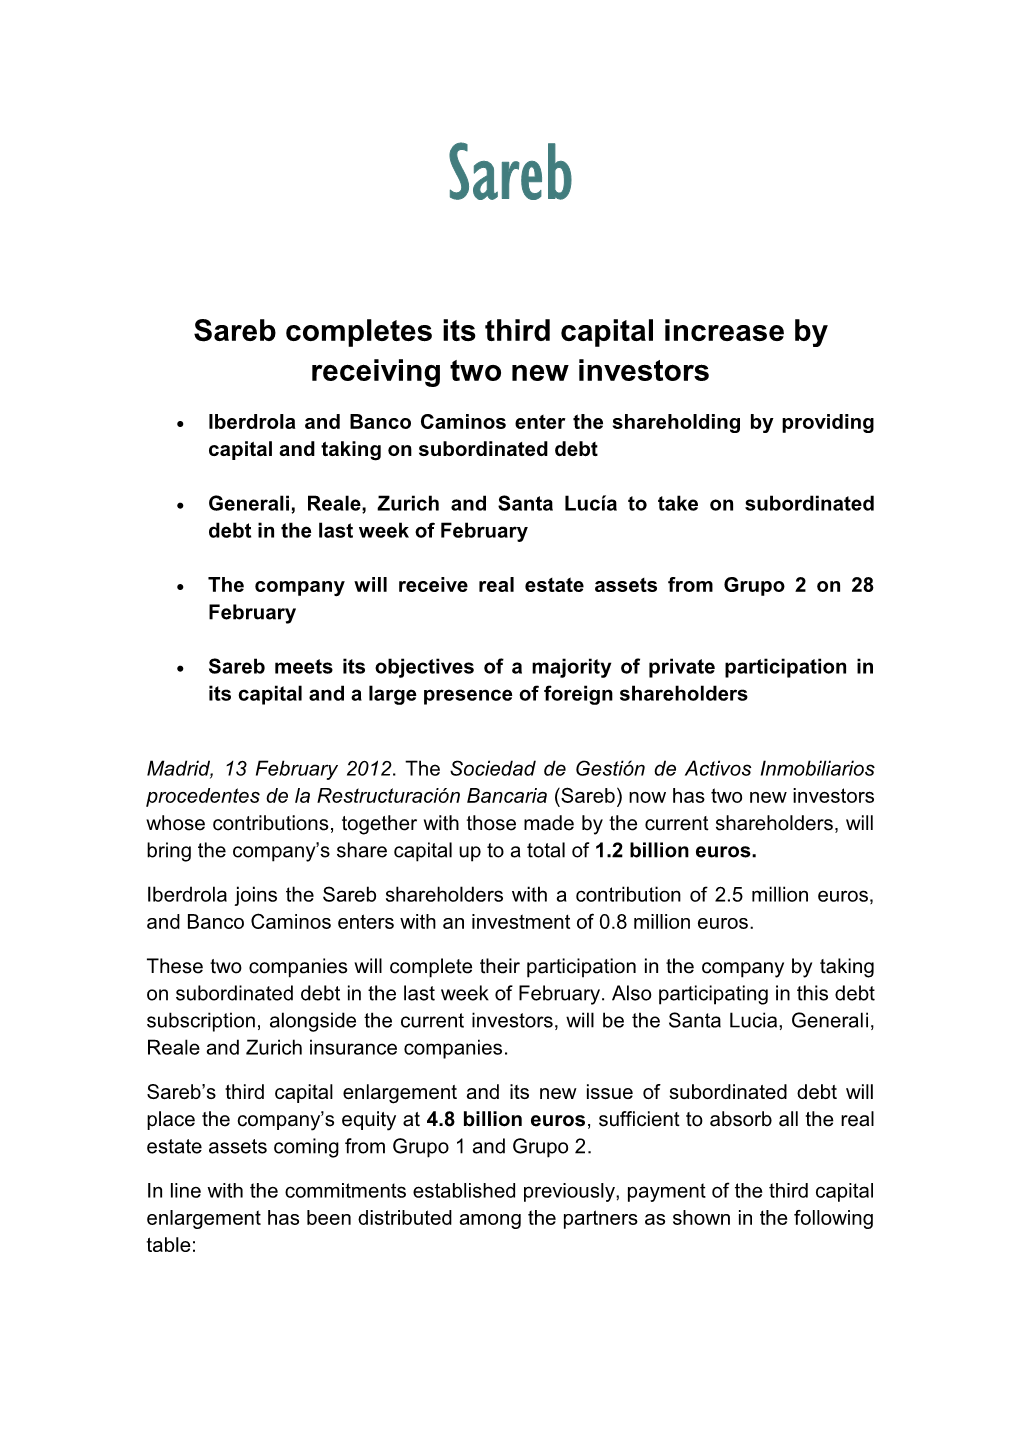 Sareb Completes Its Third Capital Increase by Receiving Two New Investors